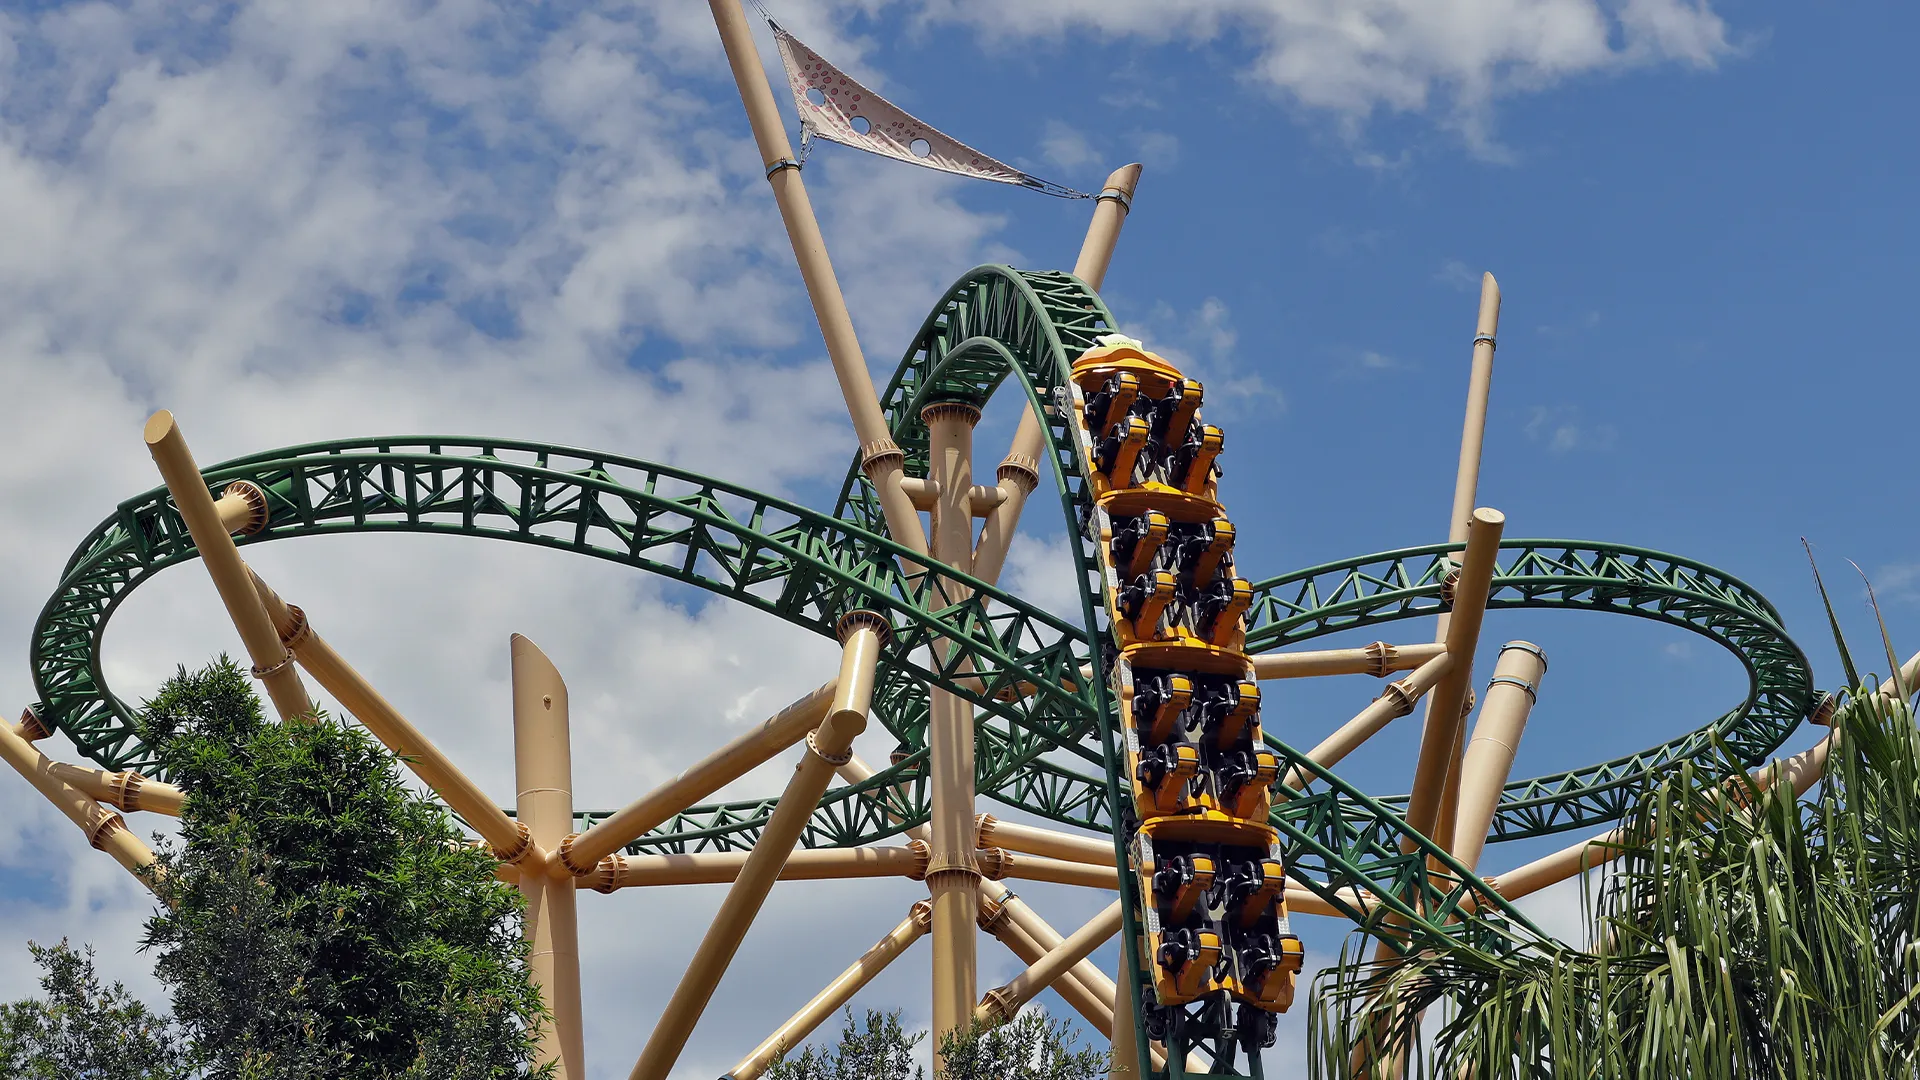 Busch Gardens Introduces New Ticket Policy Allowing Guests to Postpone Visits During Excessively Hot Weather